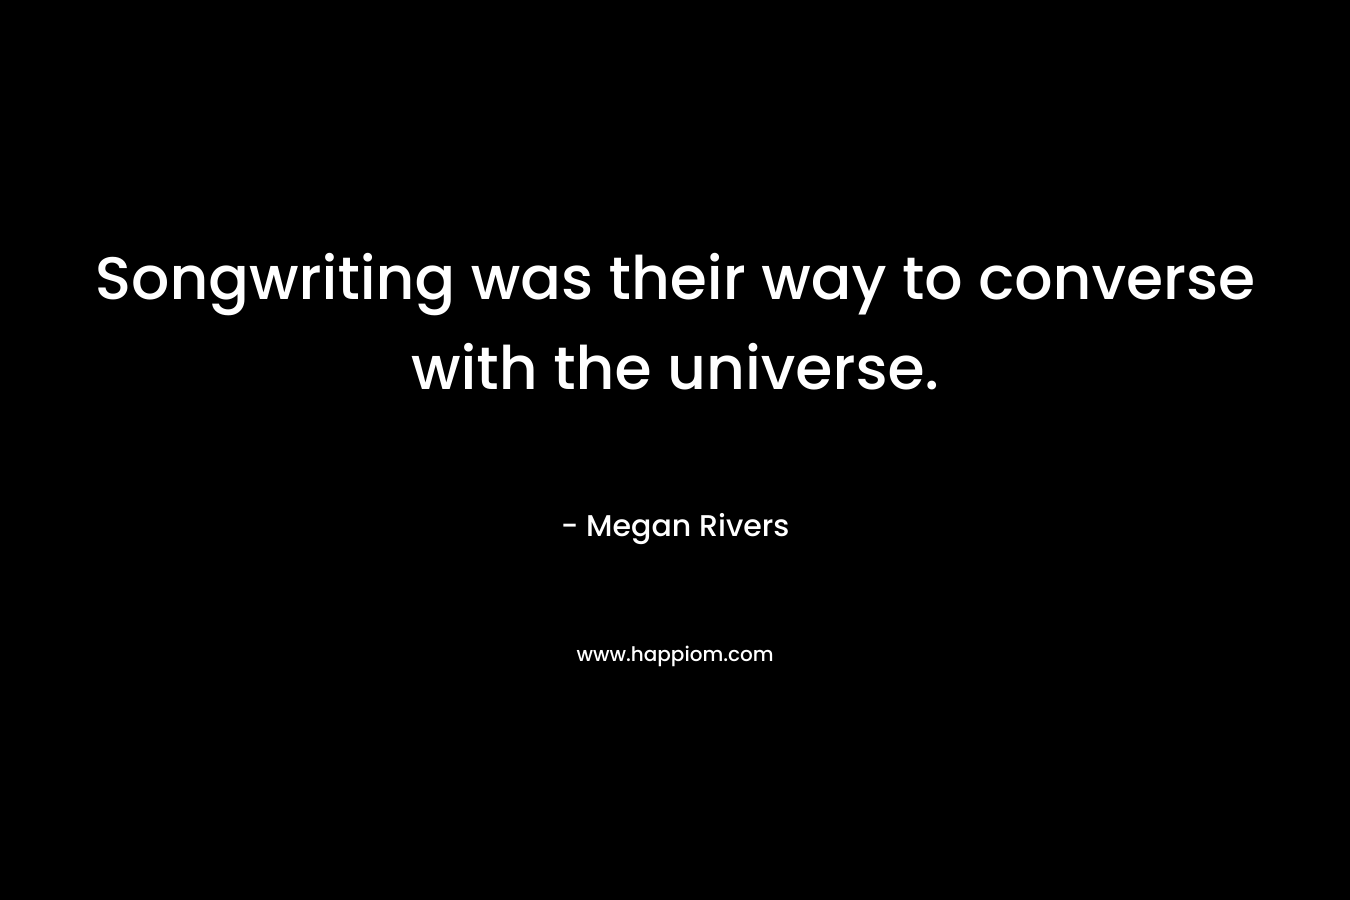 Songwriting was their way to converse with the universe. – Megan Rivers